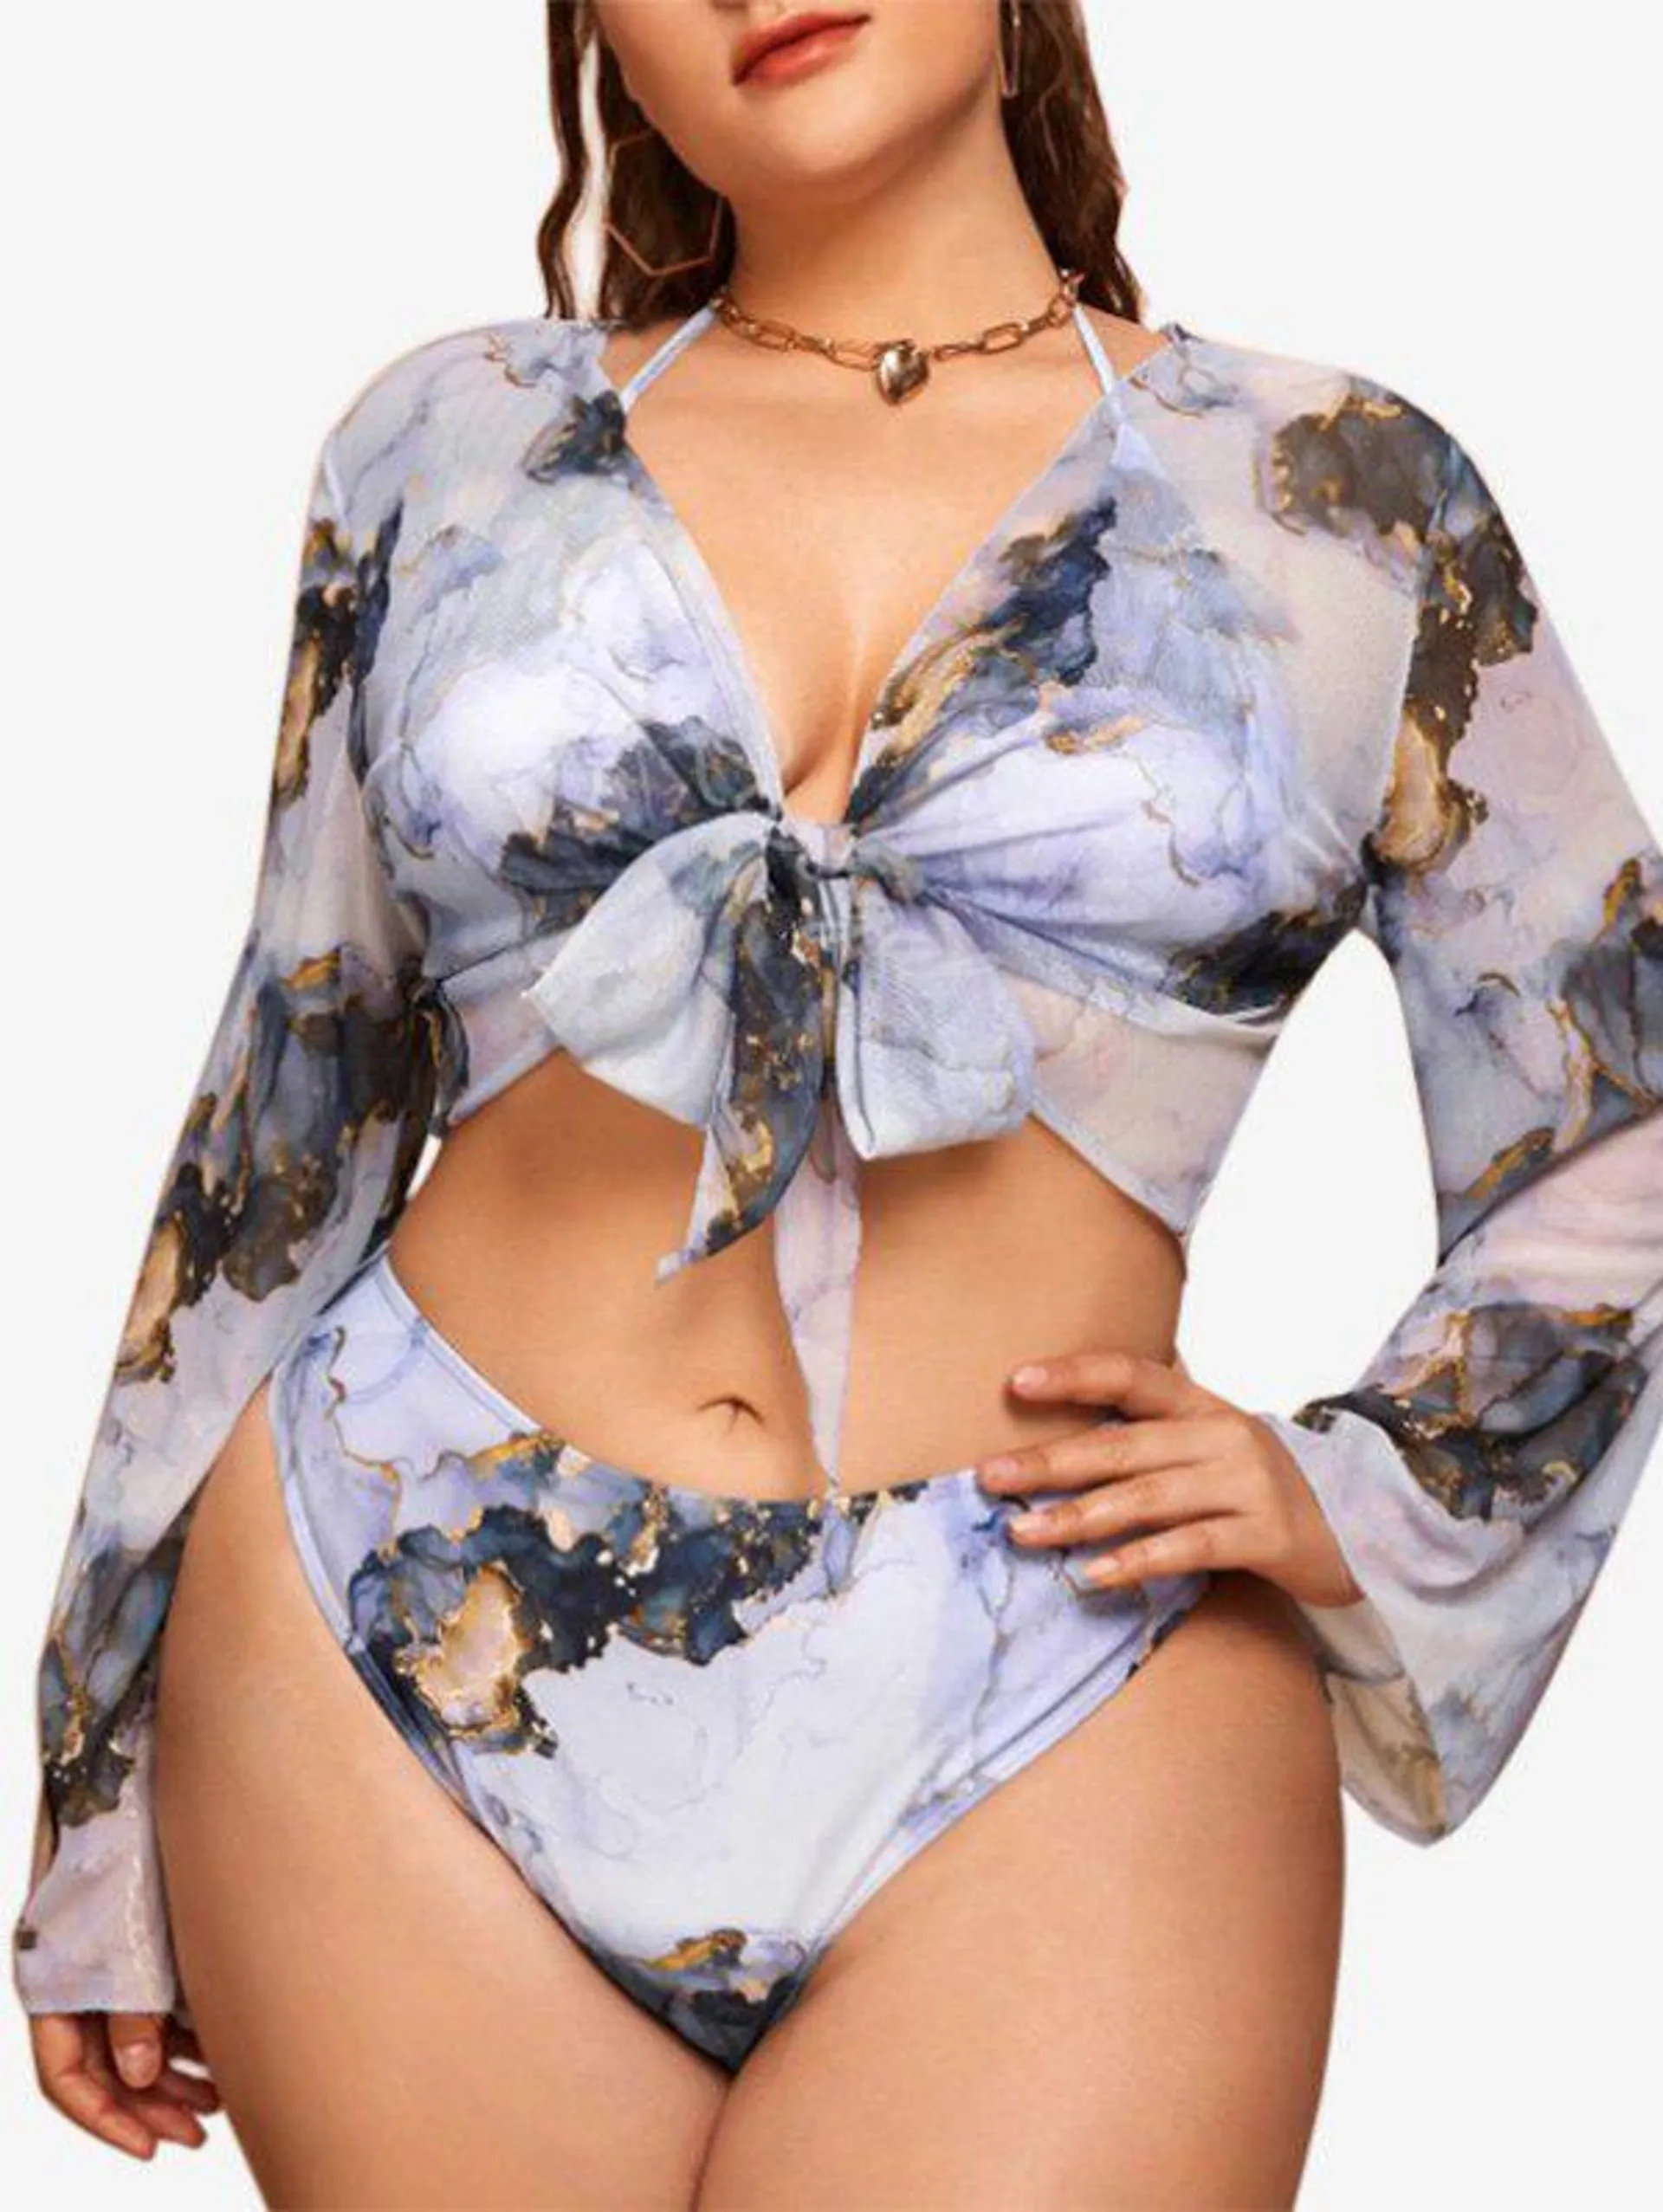 Plus Size Halter Padded Printed Bikini Swimsuit with Knot Cover Up Top - 4xl